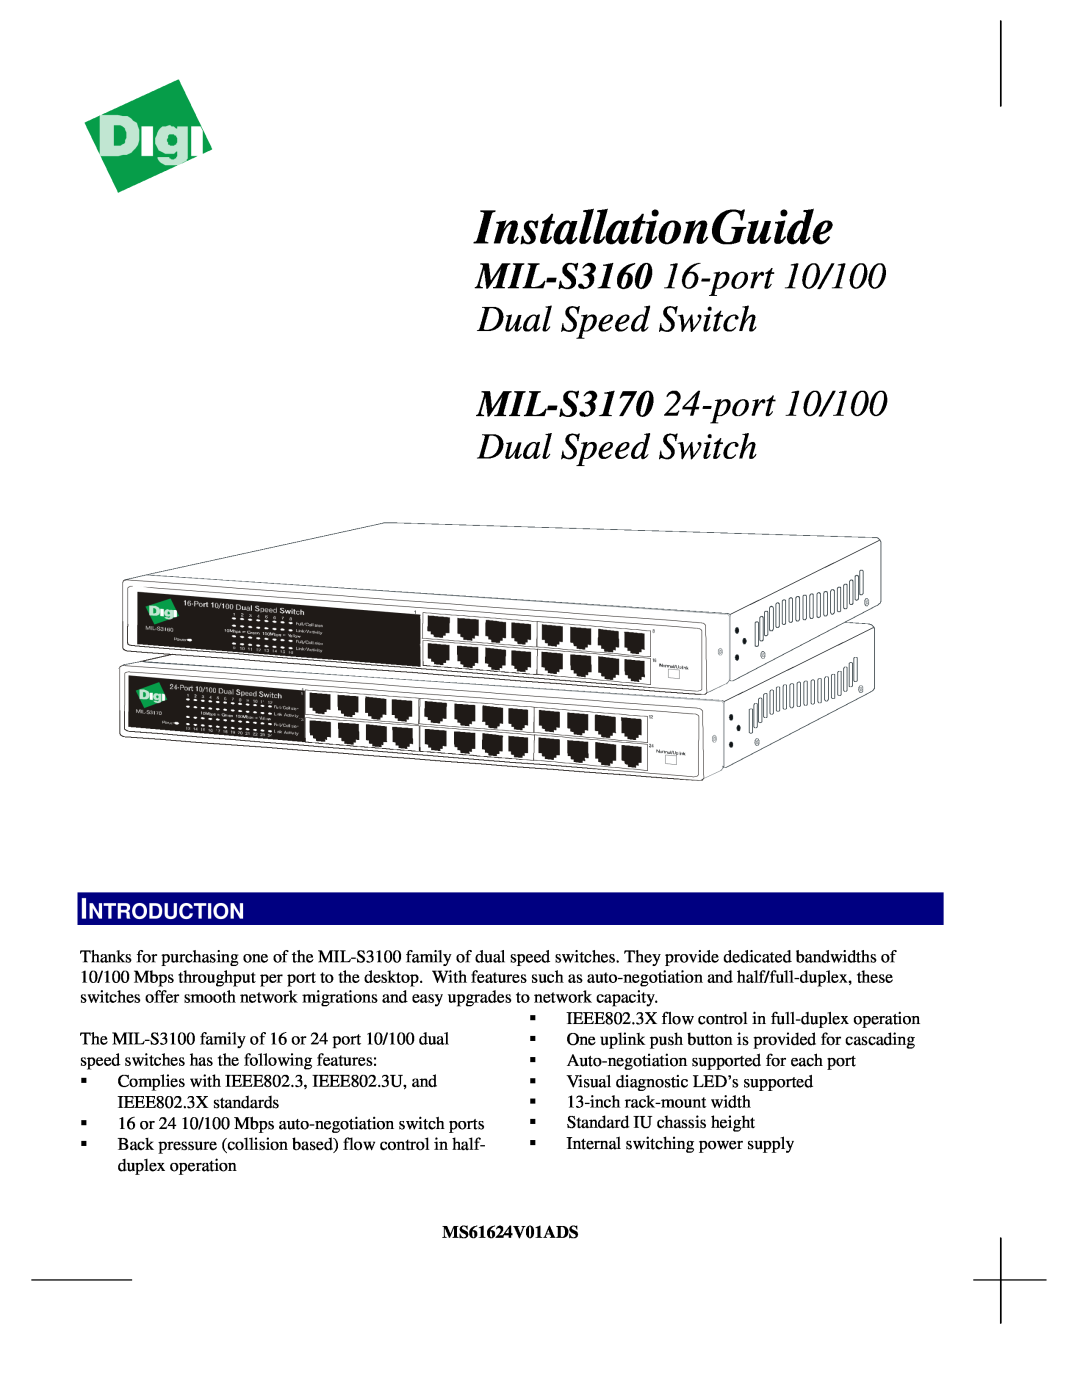 Digi manual Introduction, InstallationGuide, MIL-S3160 16-port 10/100 Dual Speed Switch MIL-S3170 24-port 10/100 